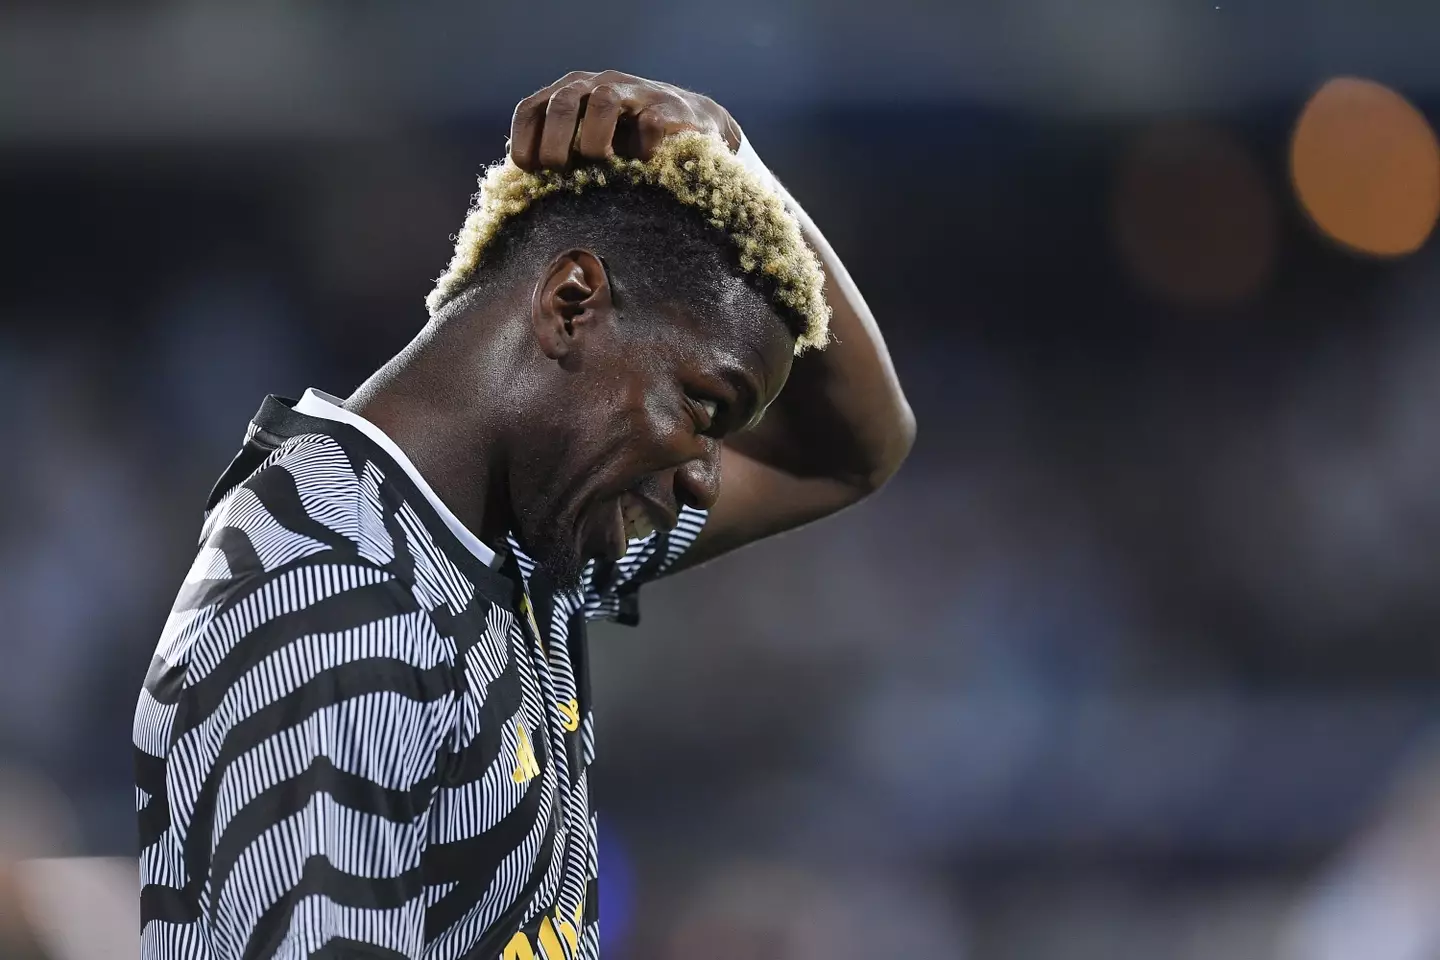 Pogba will appeal the four-year ban (Getty)